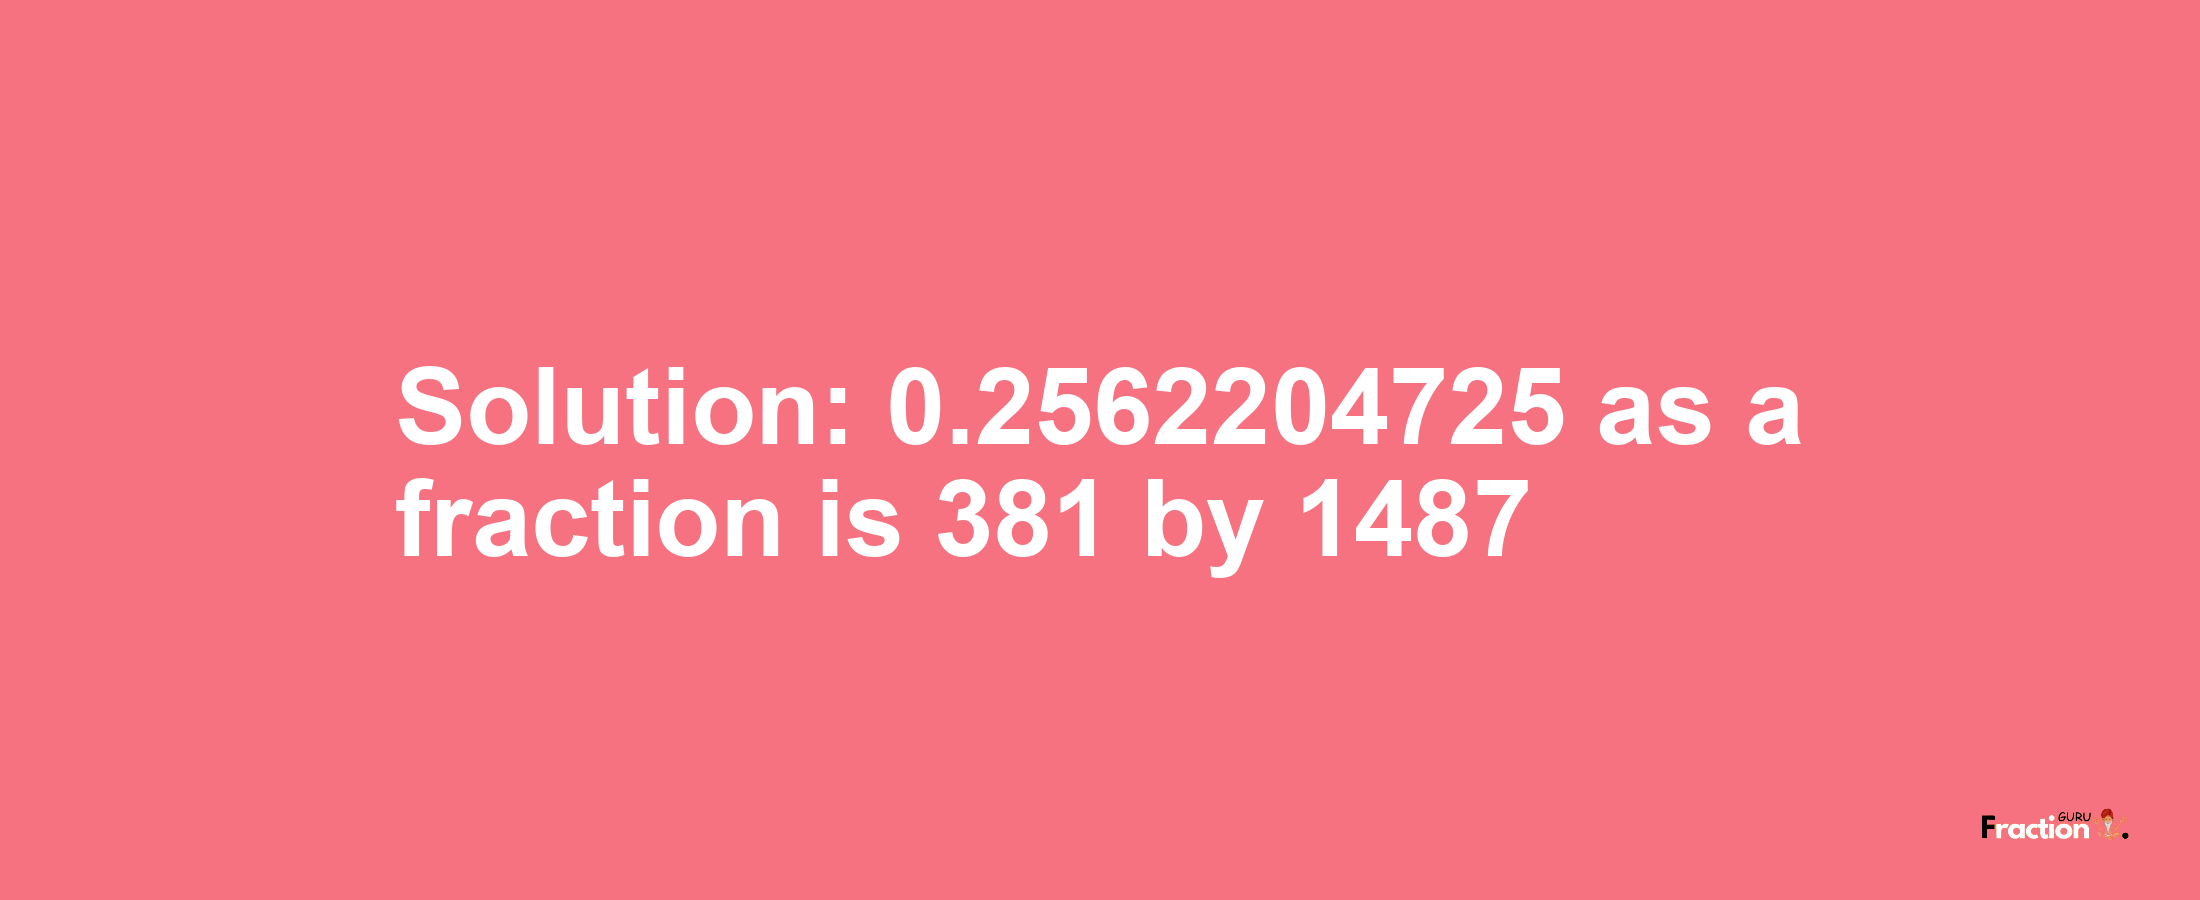 Solution:0.2562204725 as a fraction is 381/1487